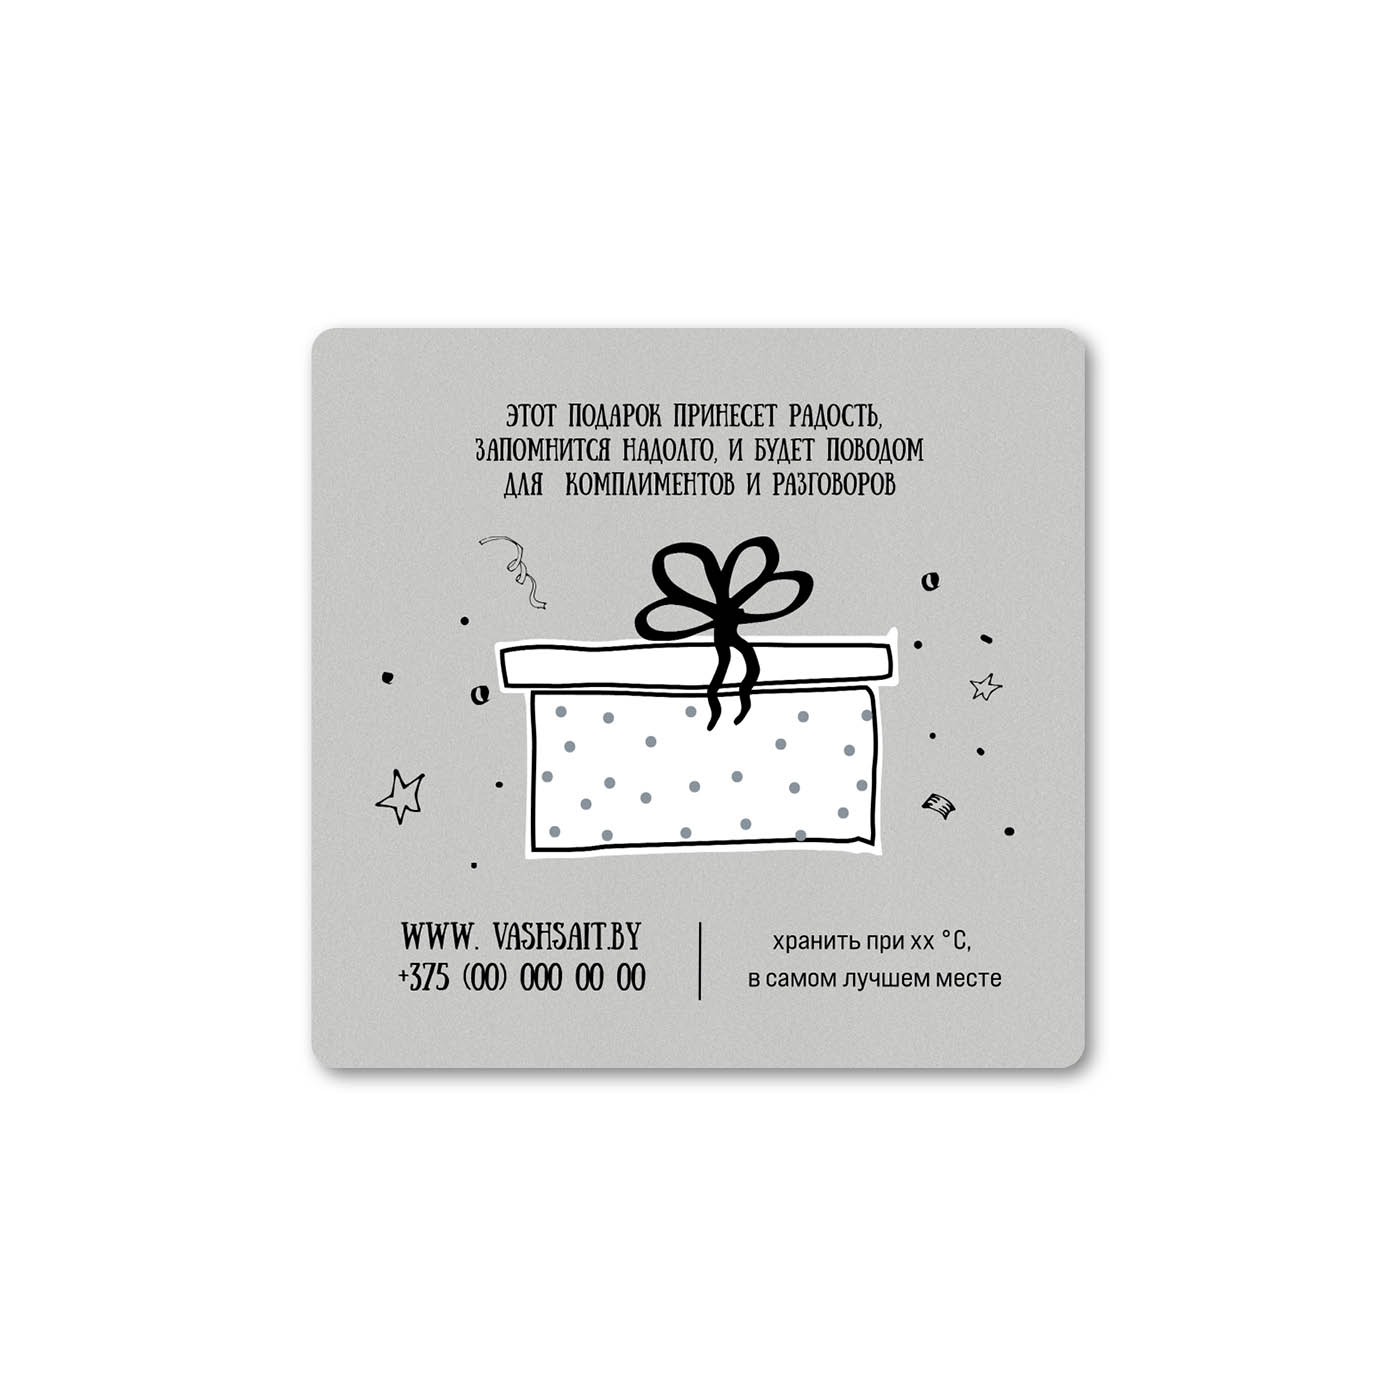 Stickers, square labels A gift on a gray background